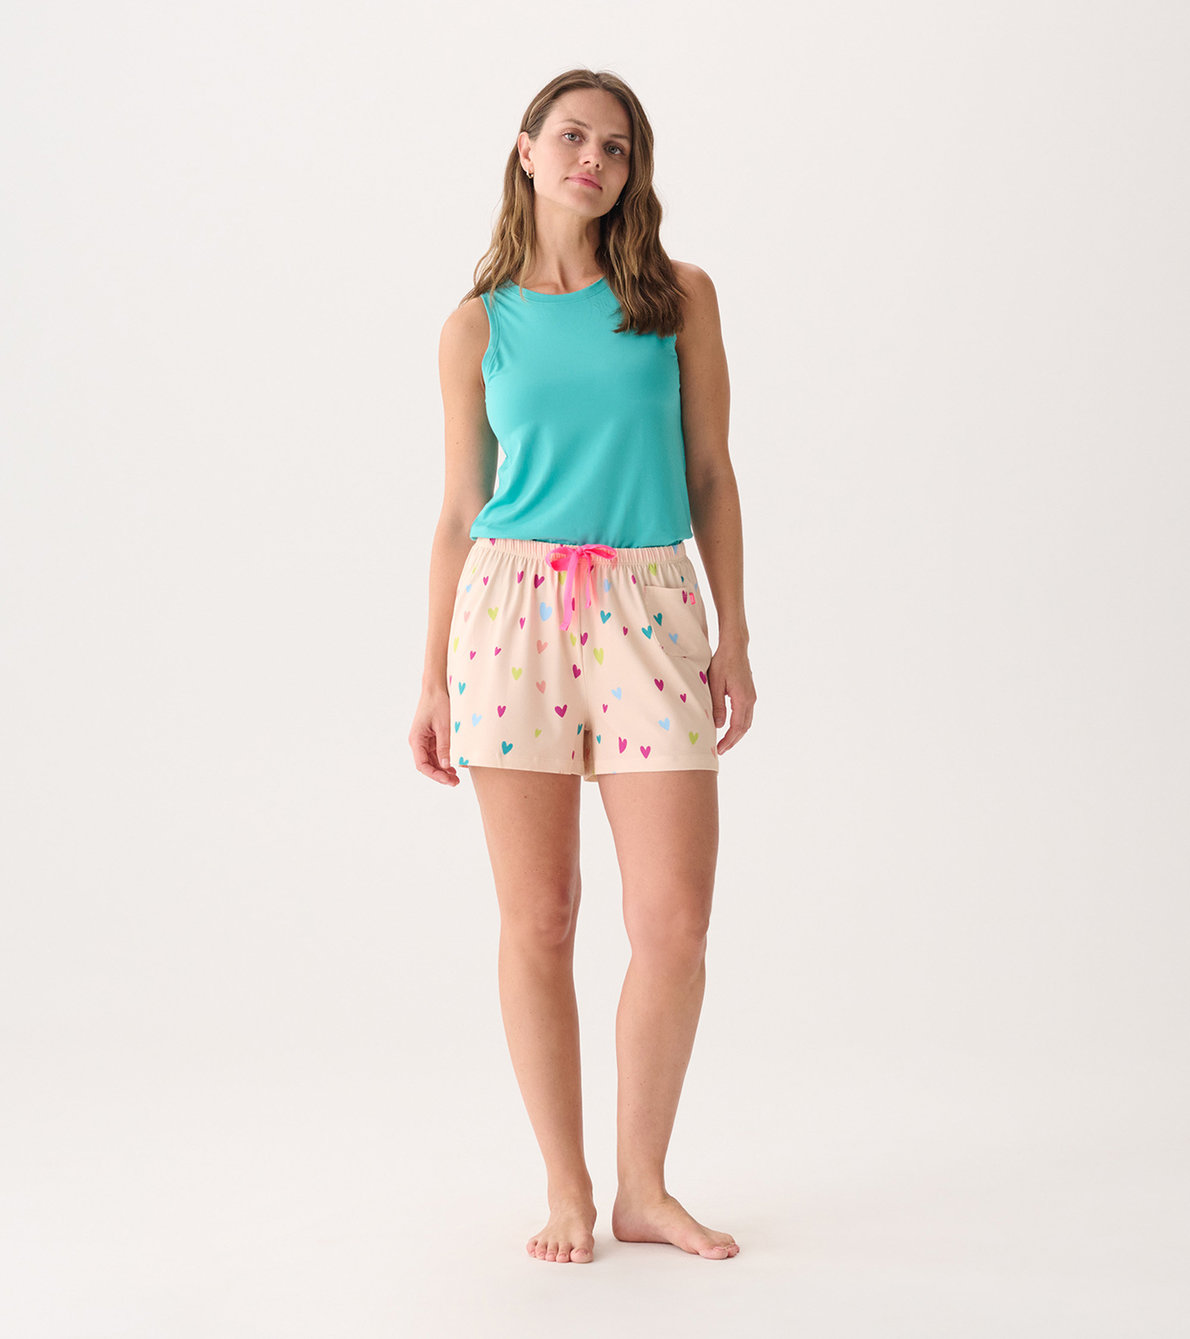 View larger image of Capelton Road Women's Jelly Bean Hearts Pajama Shorts